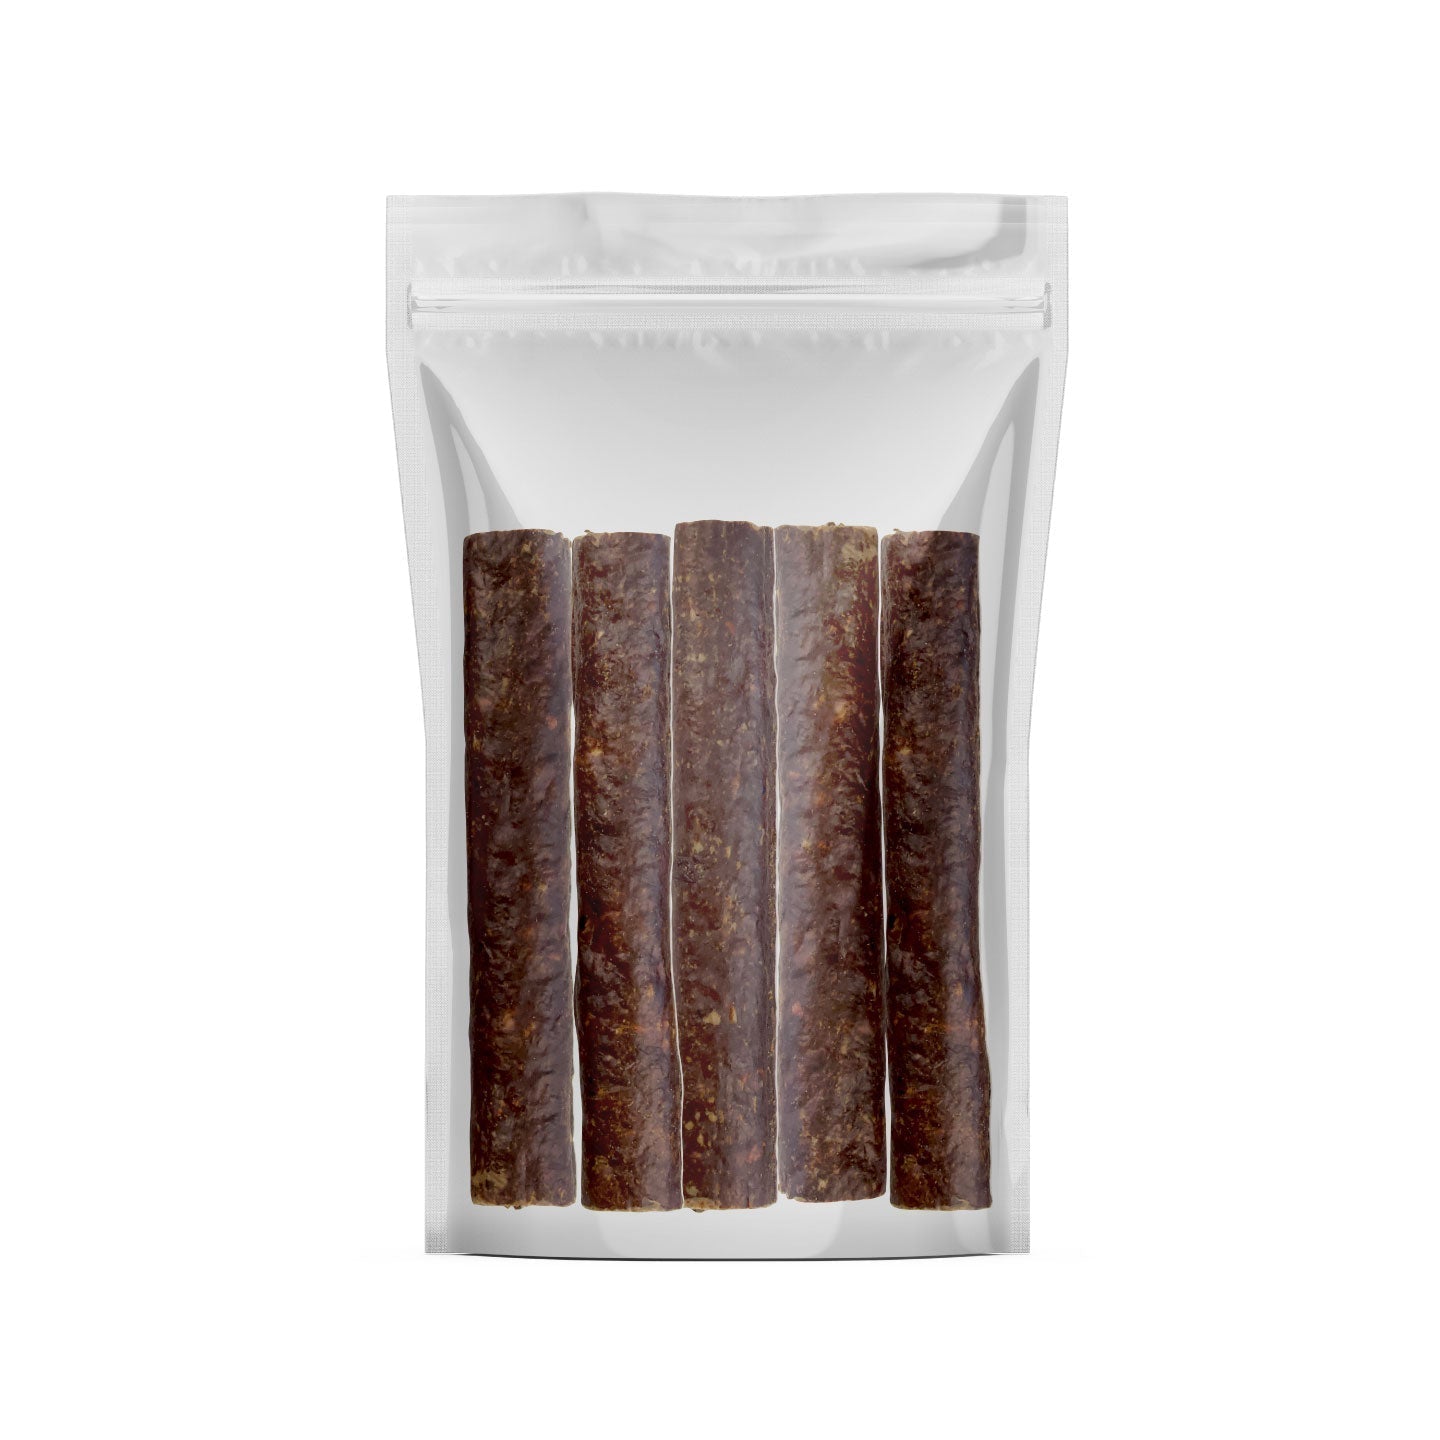 All-Natural Beef Sausage Dog Treats 6 Inch (25/case) by American Pet Supplies